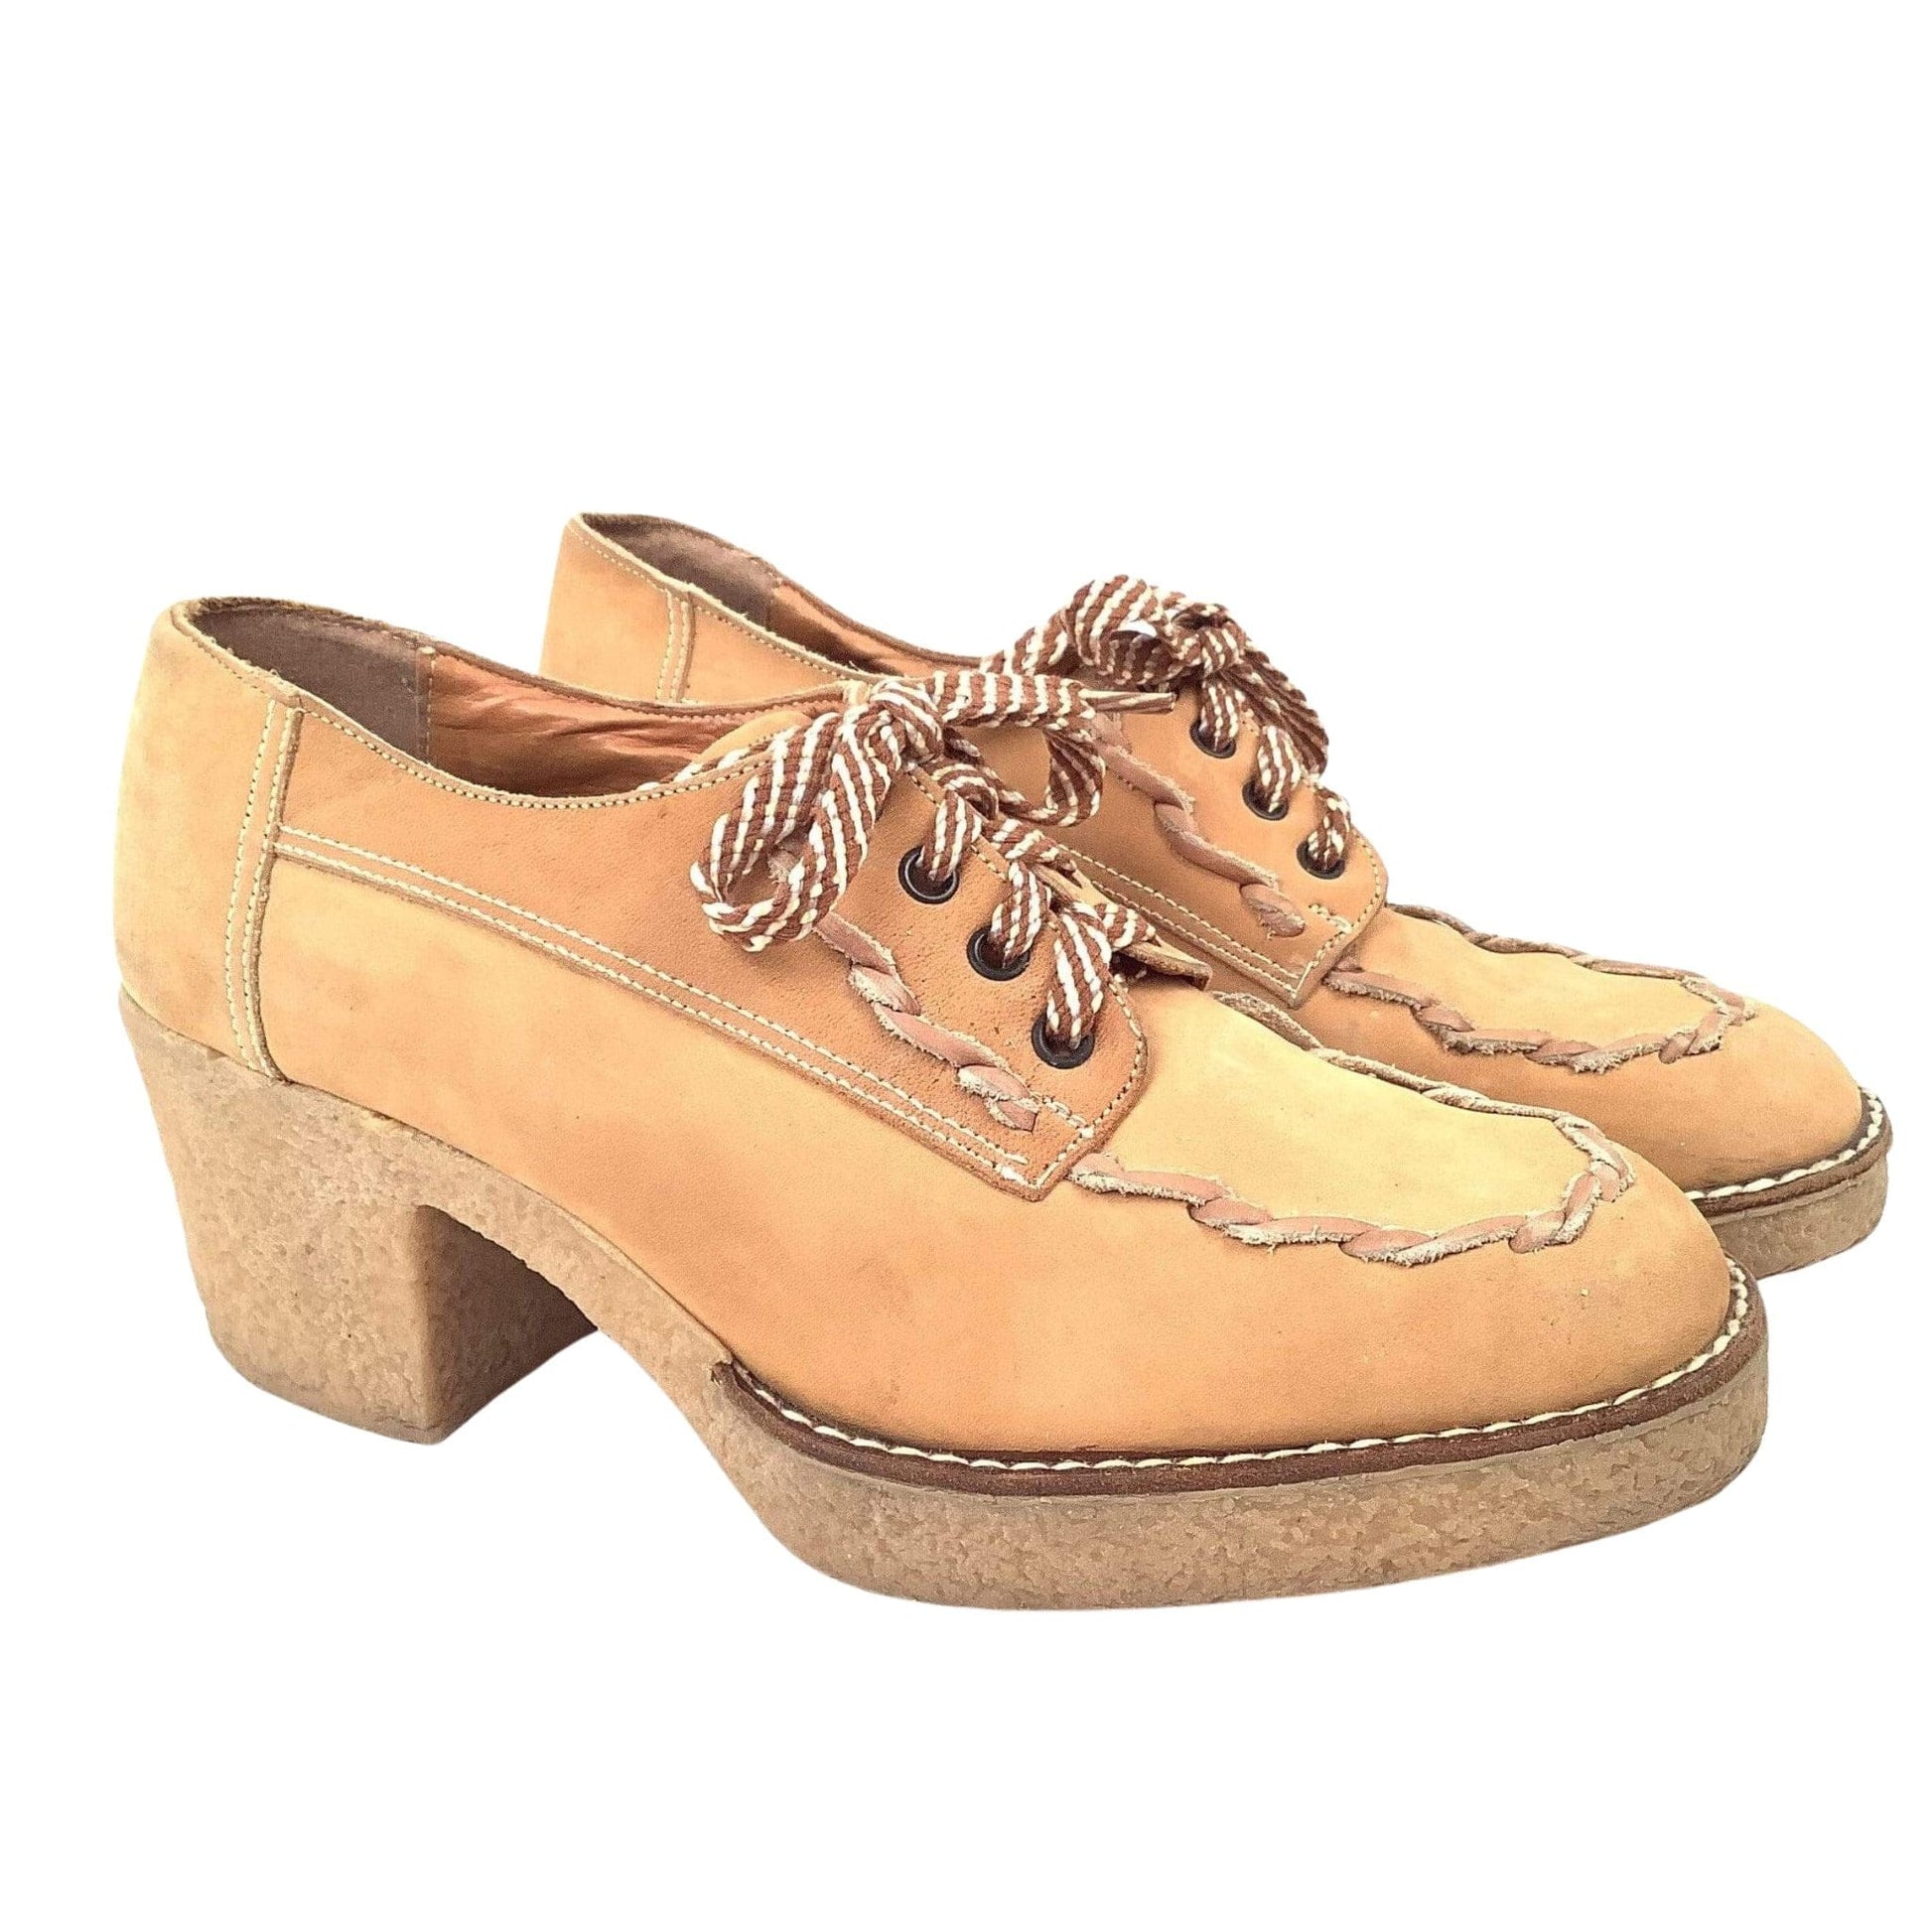 1980s Funky Creepers 8.5 / Tan / Vintage 1980s